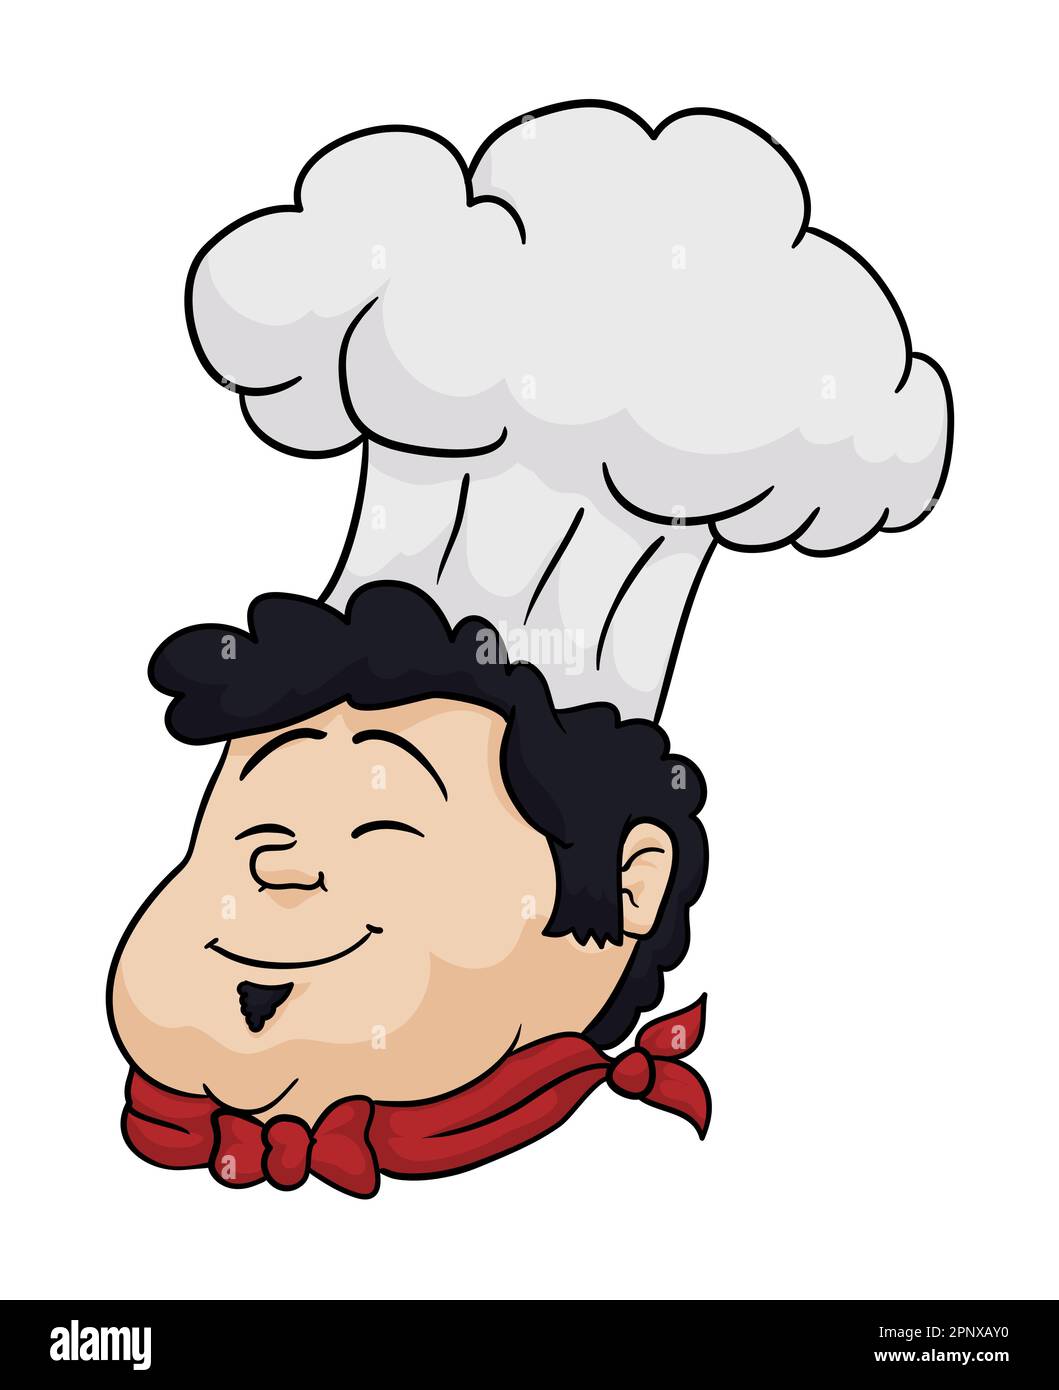 Smiling head of chubby cook with red neckerchief and tall chef's hat in carton style. Stock Vector